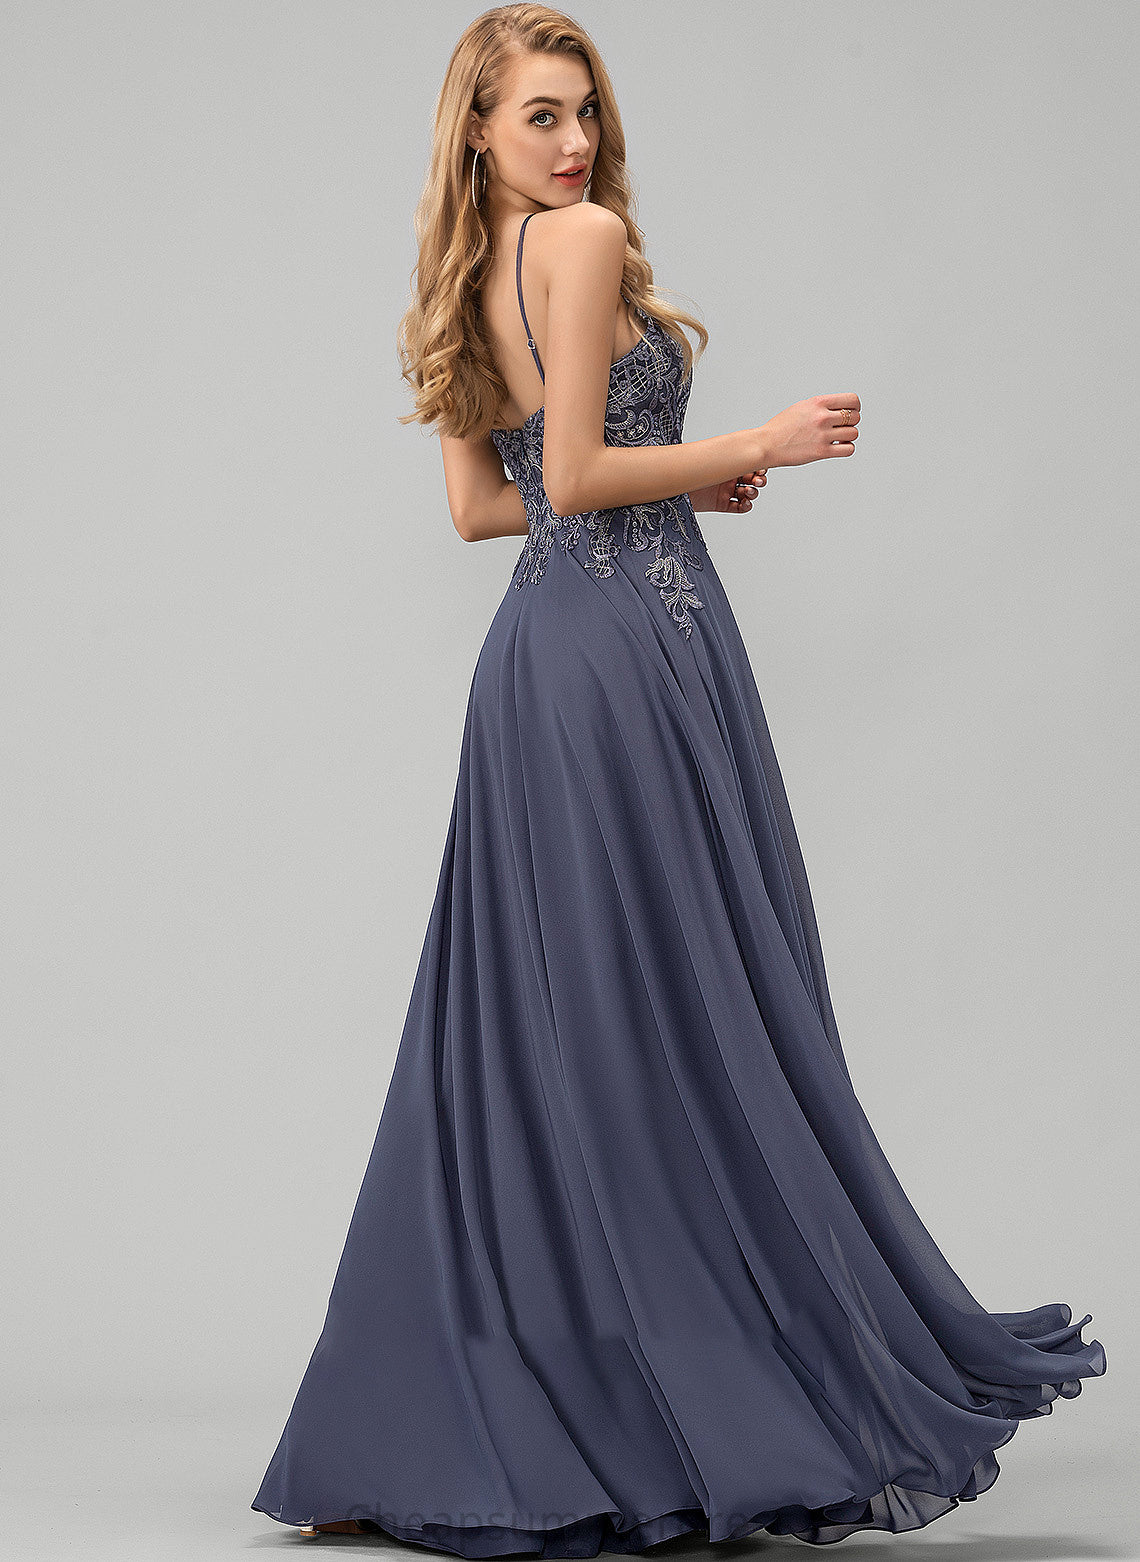 Prom Dresses With Sequins Eva Chiffon A-Line Neck Floor-Length Scoop Lace